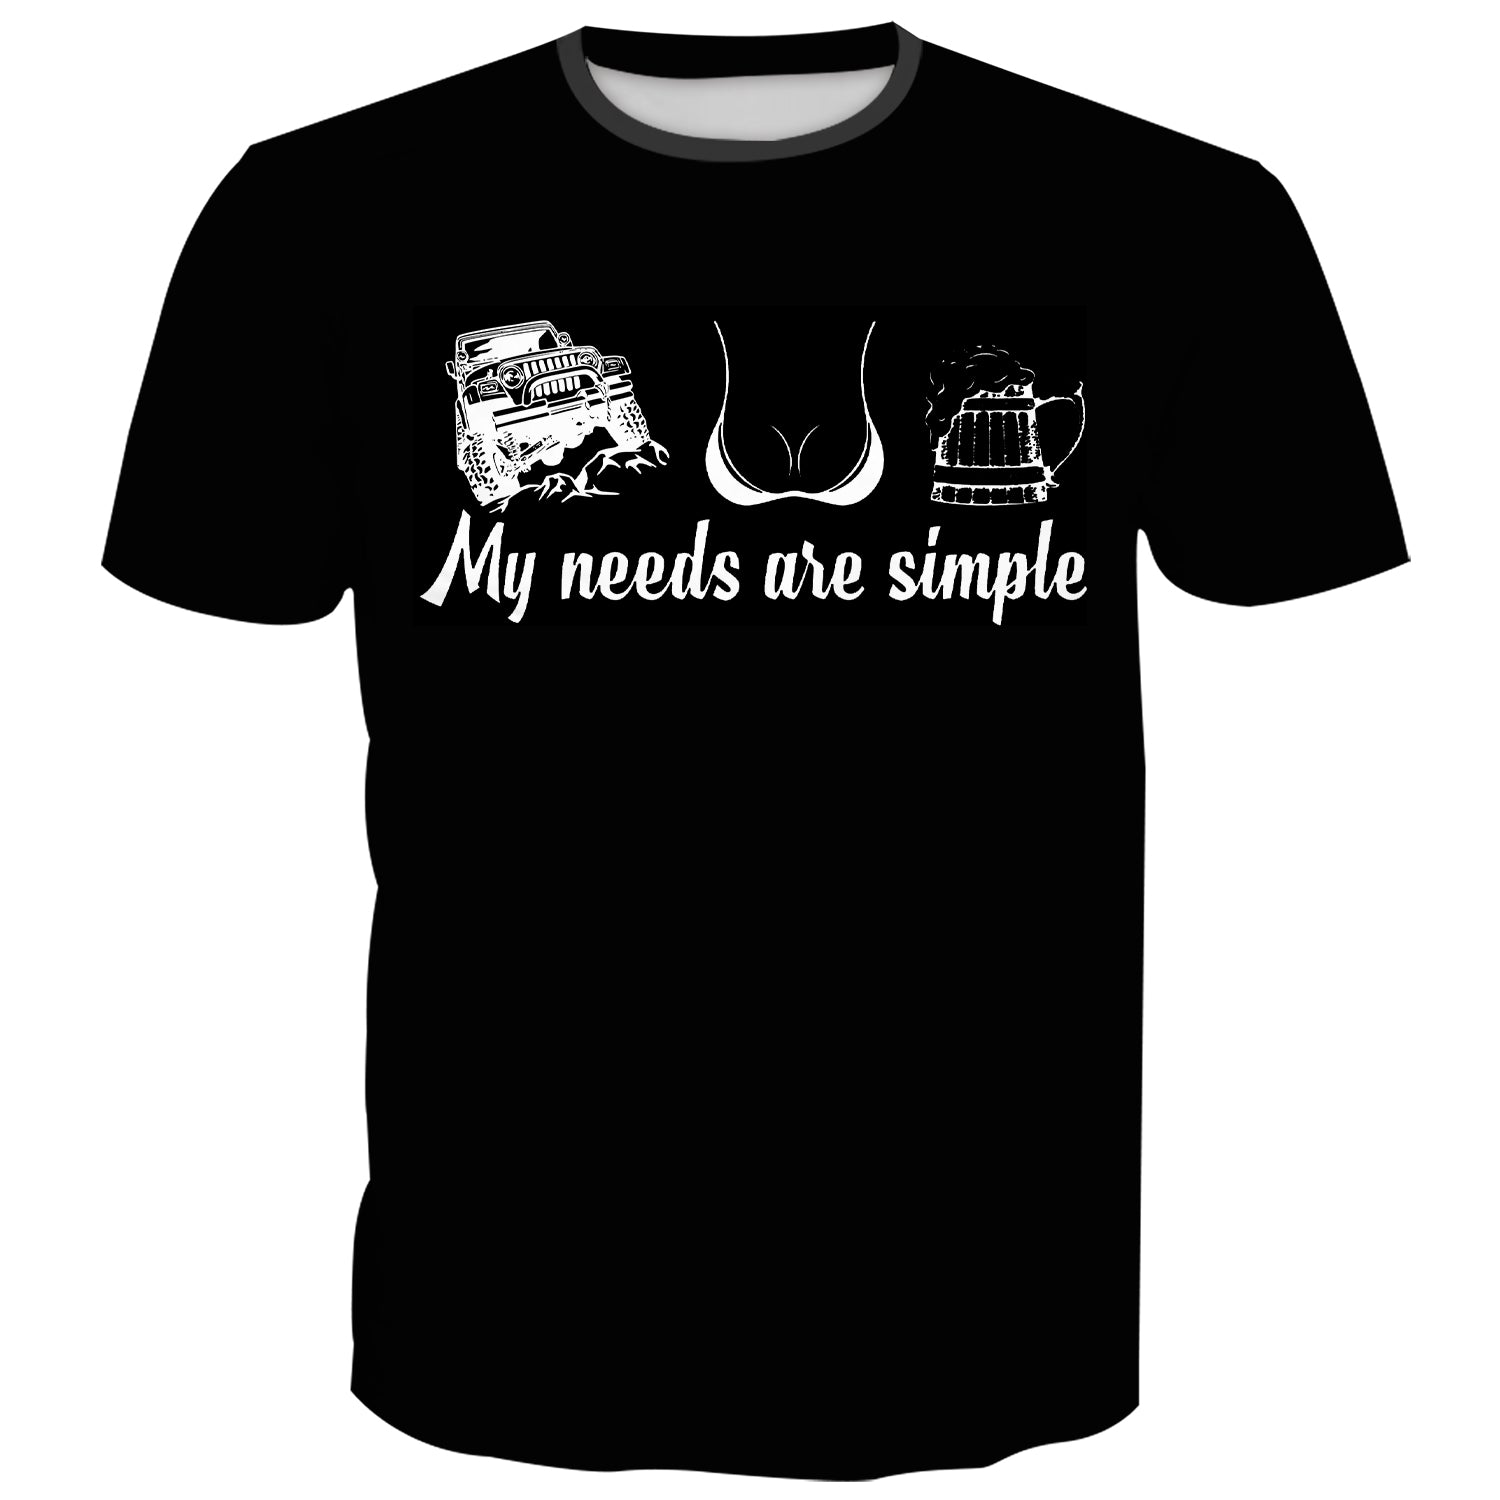 My needs are simple - Jeep T-Shirt